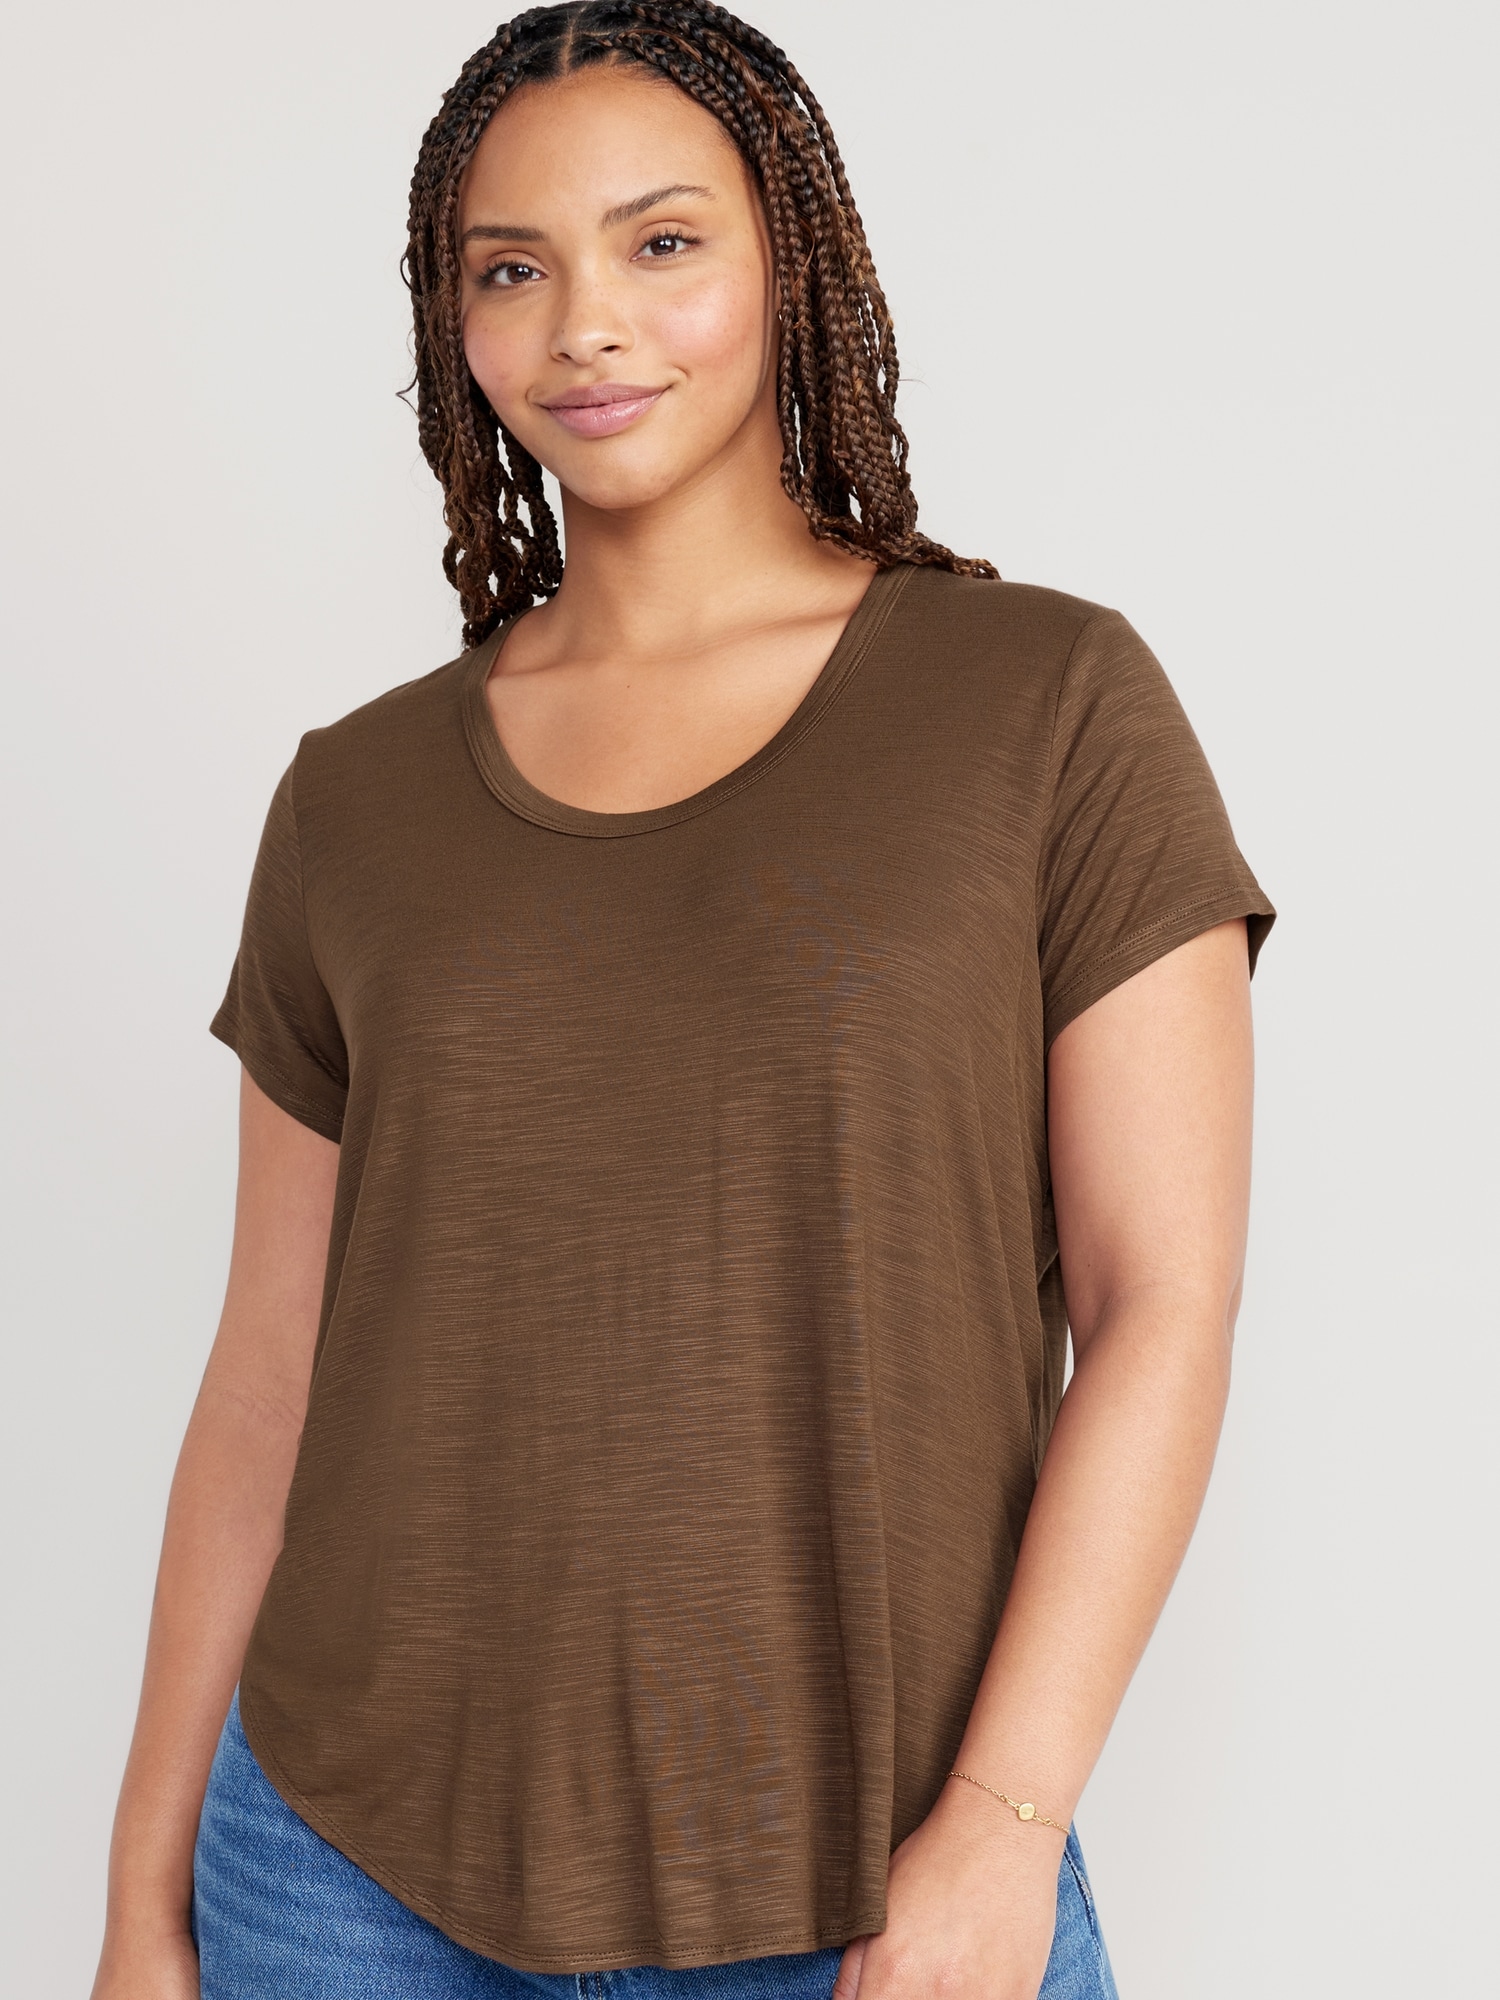 Luxe Voop-Neck Tunic T-Shirt for Women | Old Navy